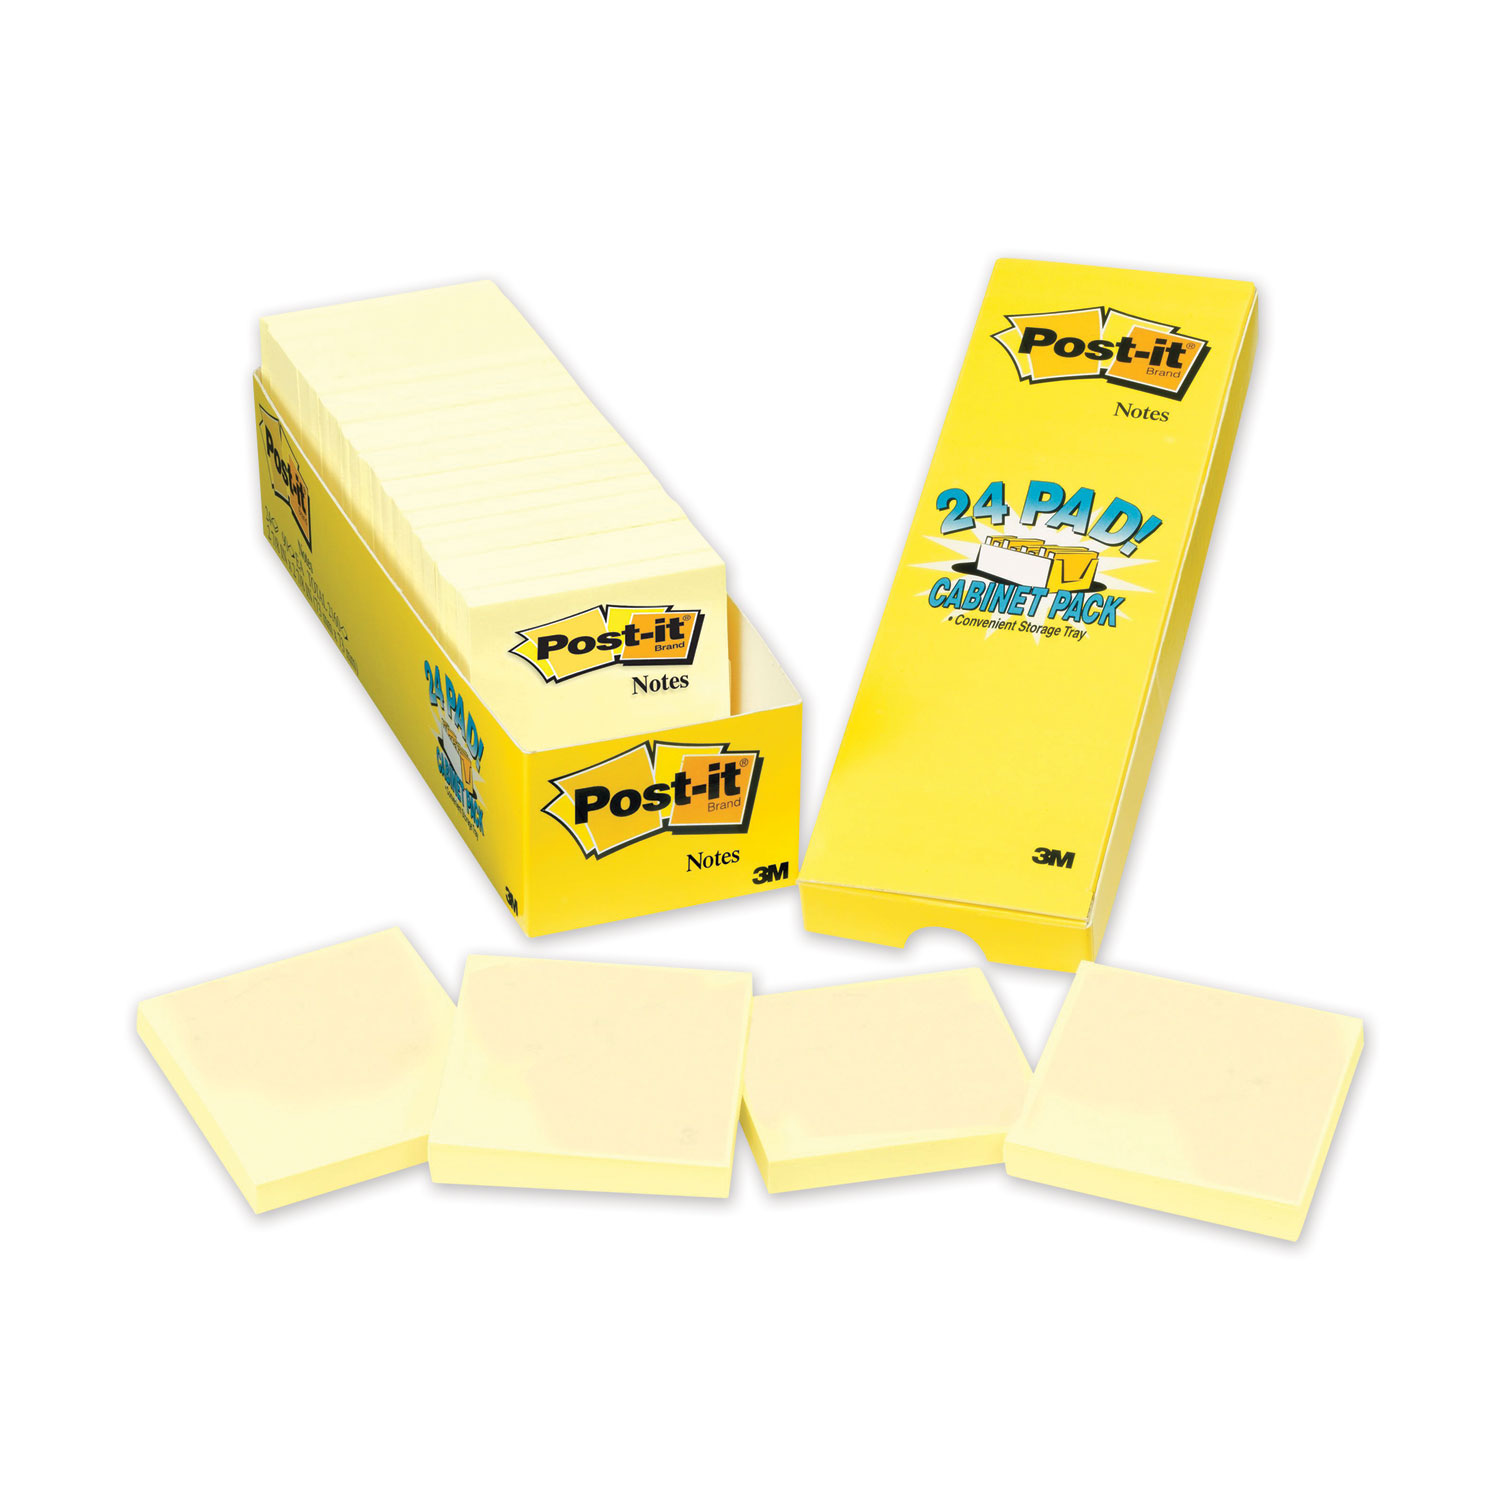 Post-it® Notes Original Pads in Canary Yellow, Cabinet Pack, 3 x 3, 90 Sheets/Pad, 24 Pads/Pack